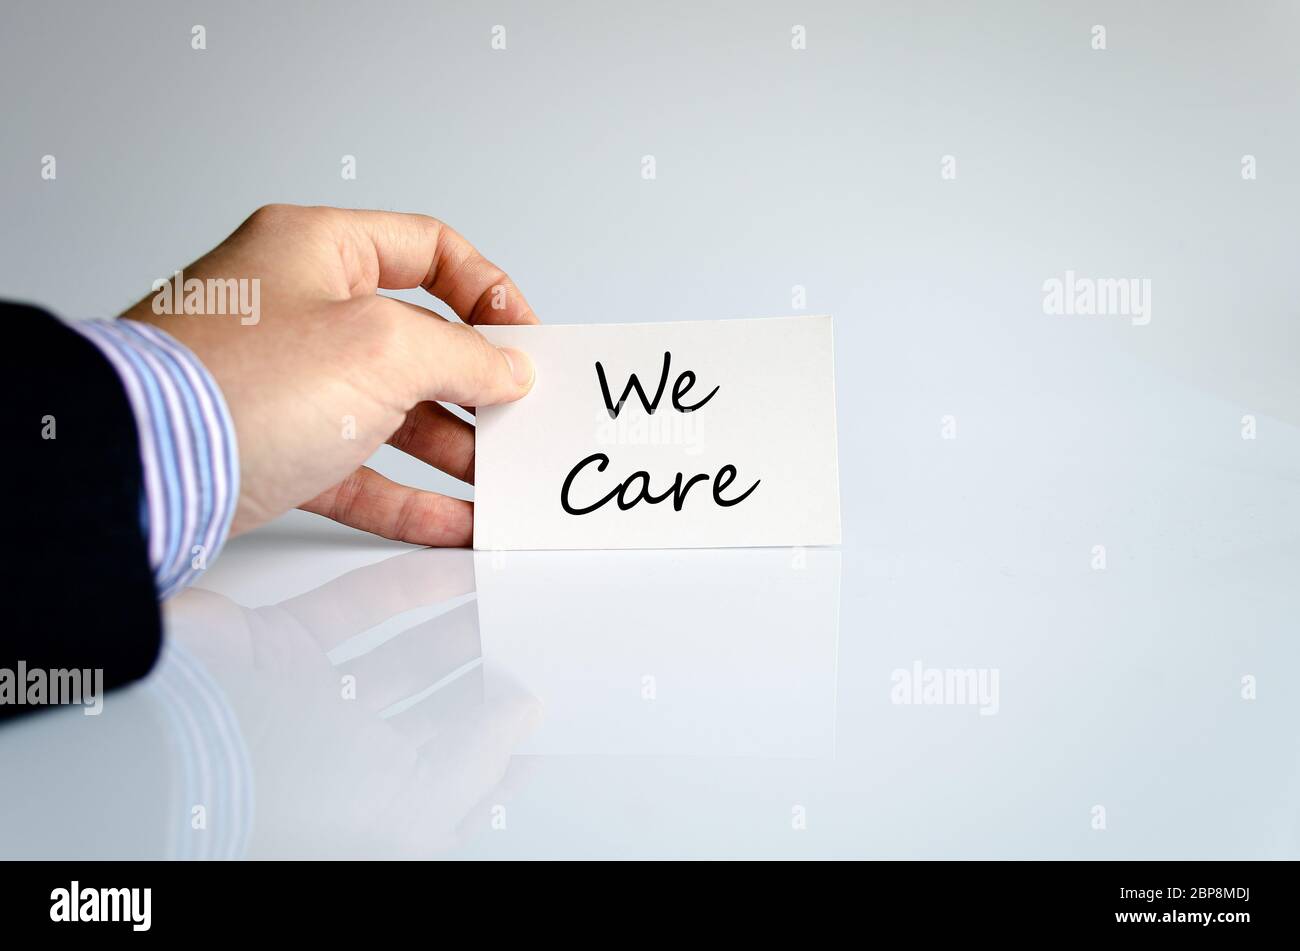 We care text concept isolated over white background Stock Photo